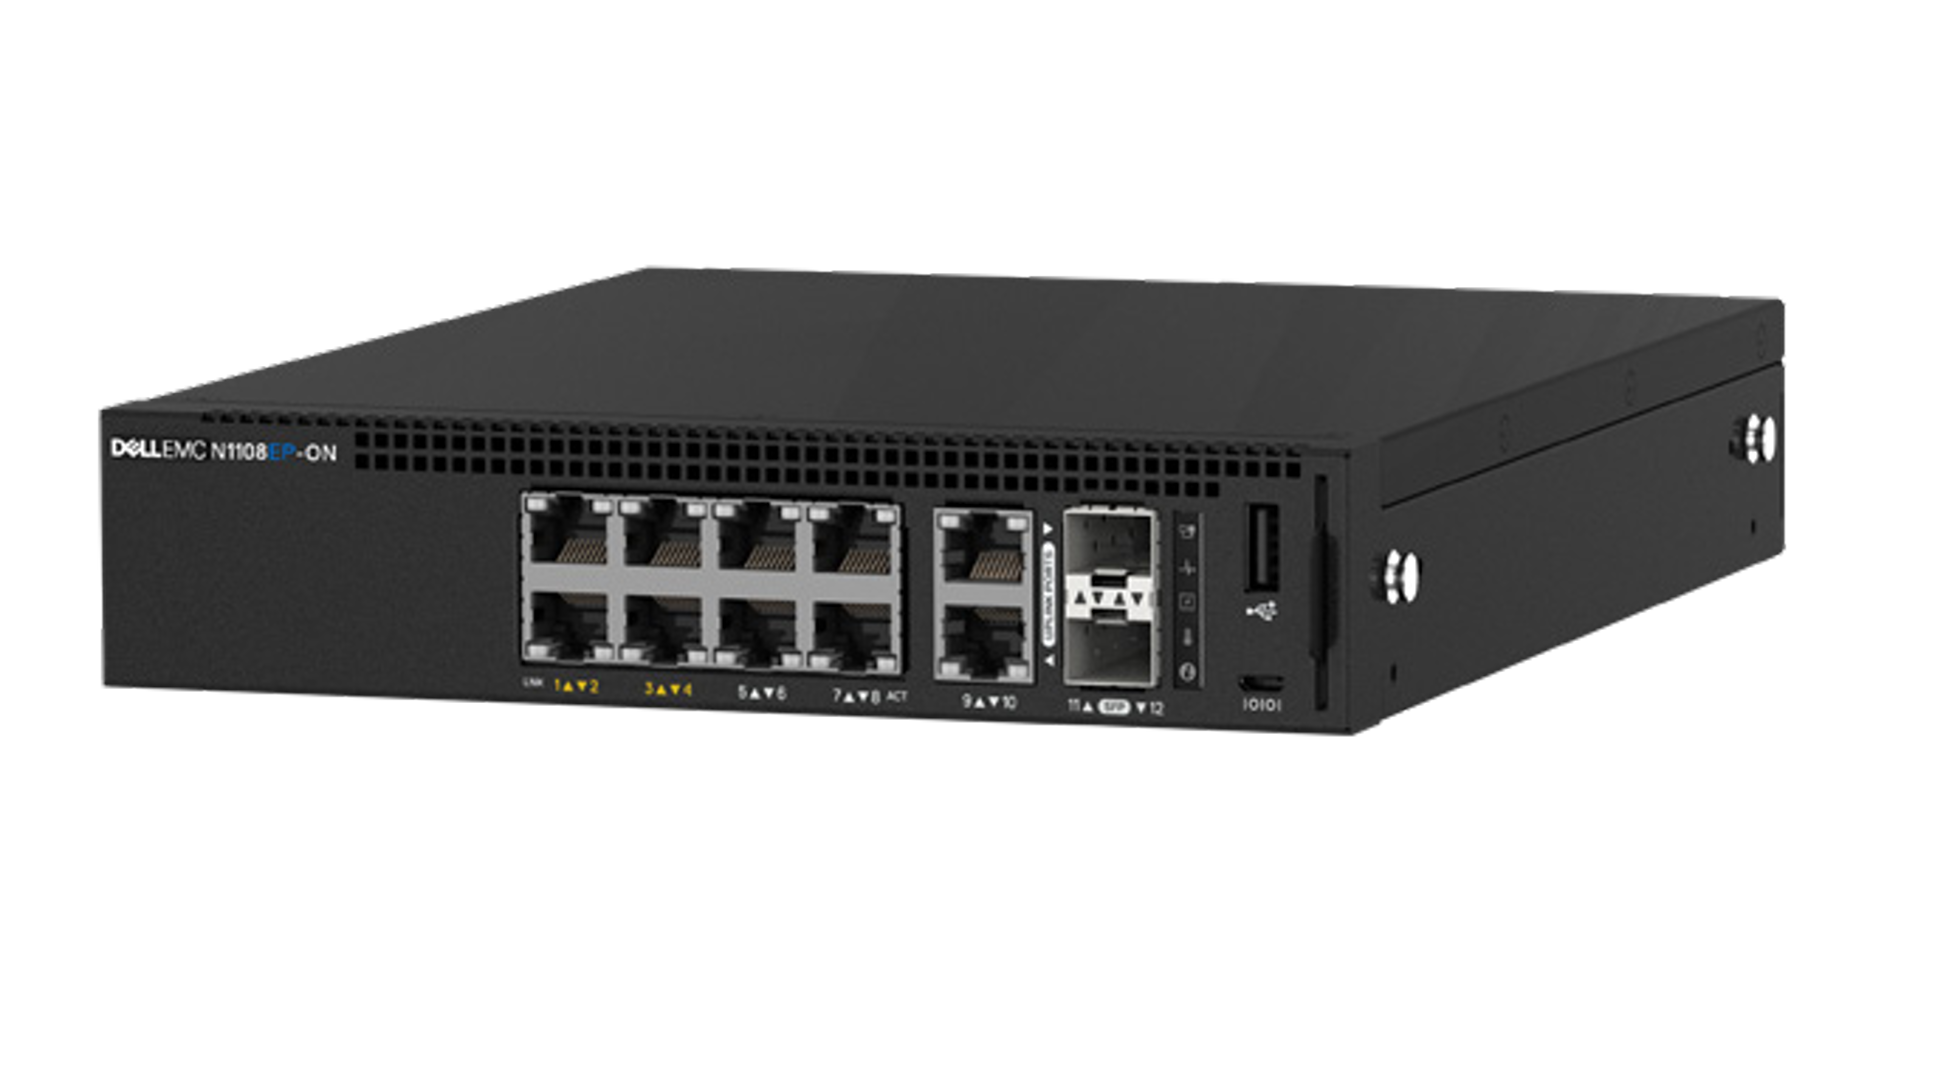 Dell EMC PowerSwitch N1108P-ON - 10xRJ-45 1Gbps 4xPoE+ Managed Switch